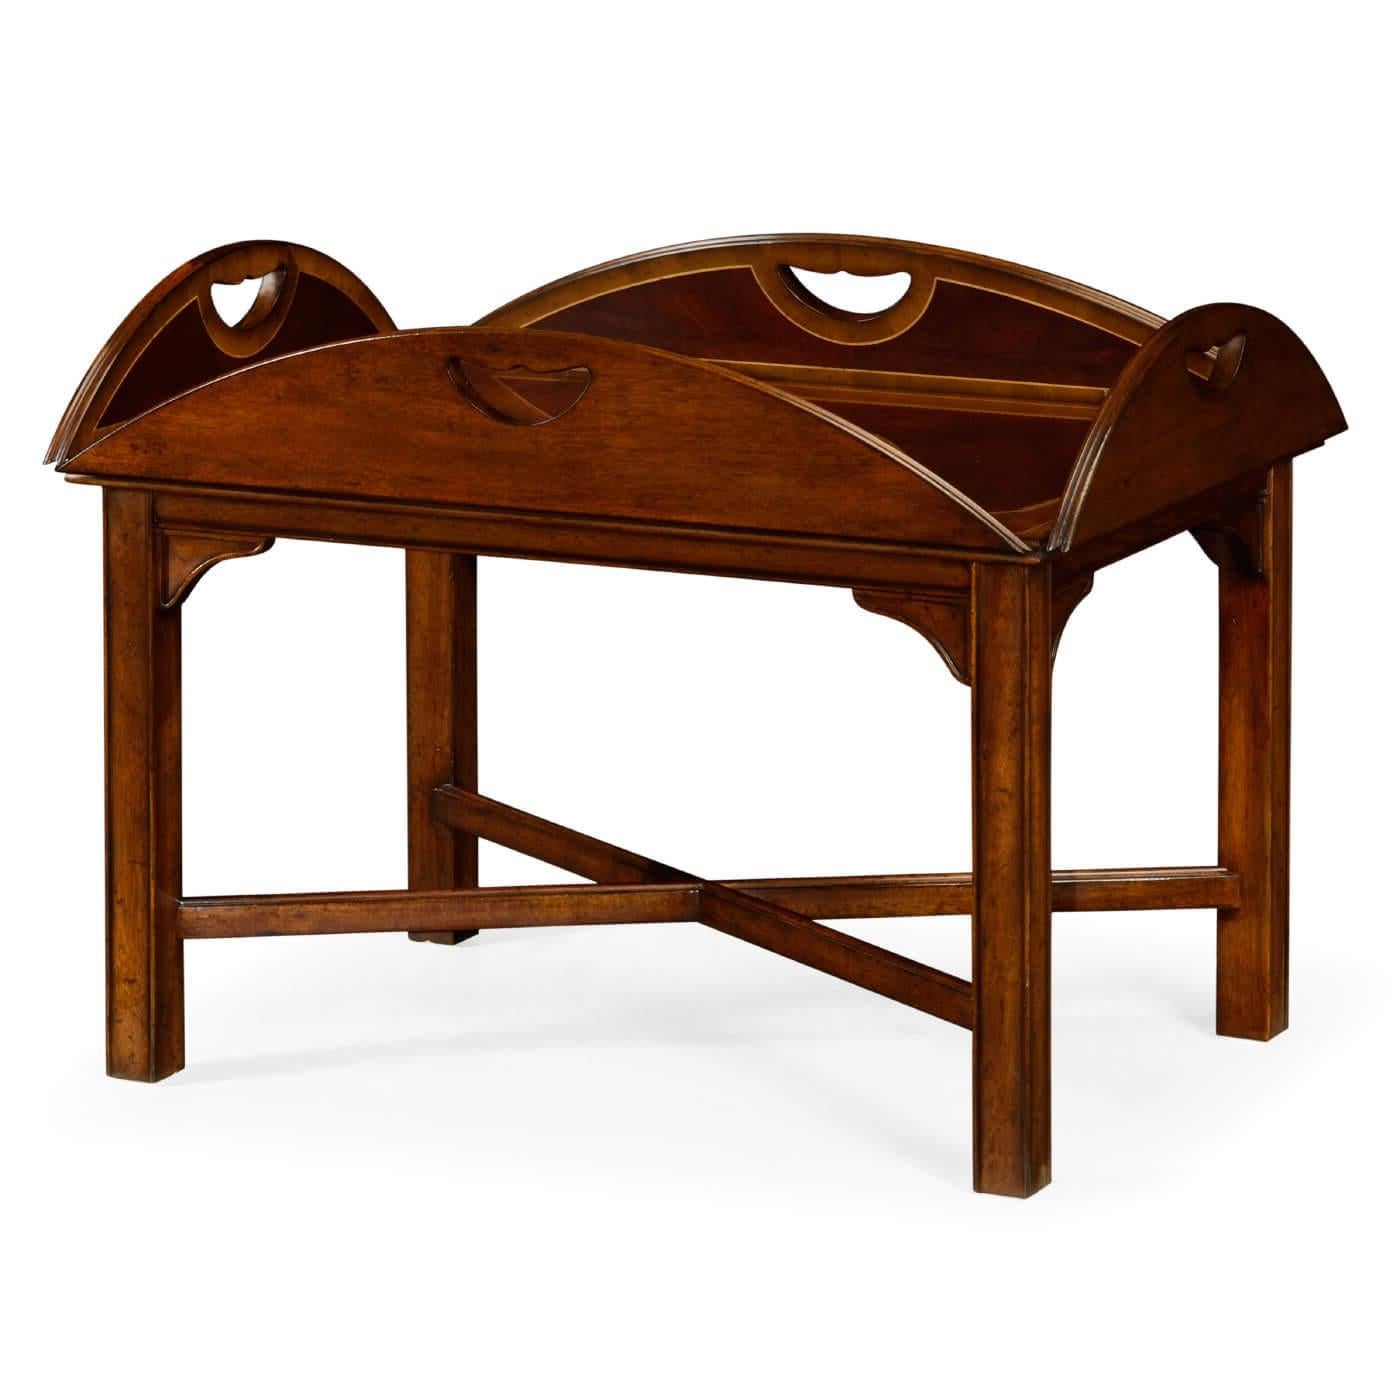 Classic English mahogany butler's tray table with countersunk hinges that allow the sides to fold upwards and the tray to be carried. 

Dimensions: 40